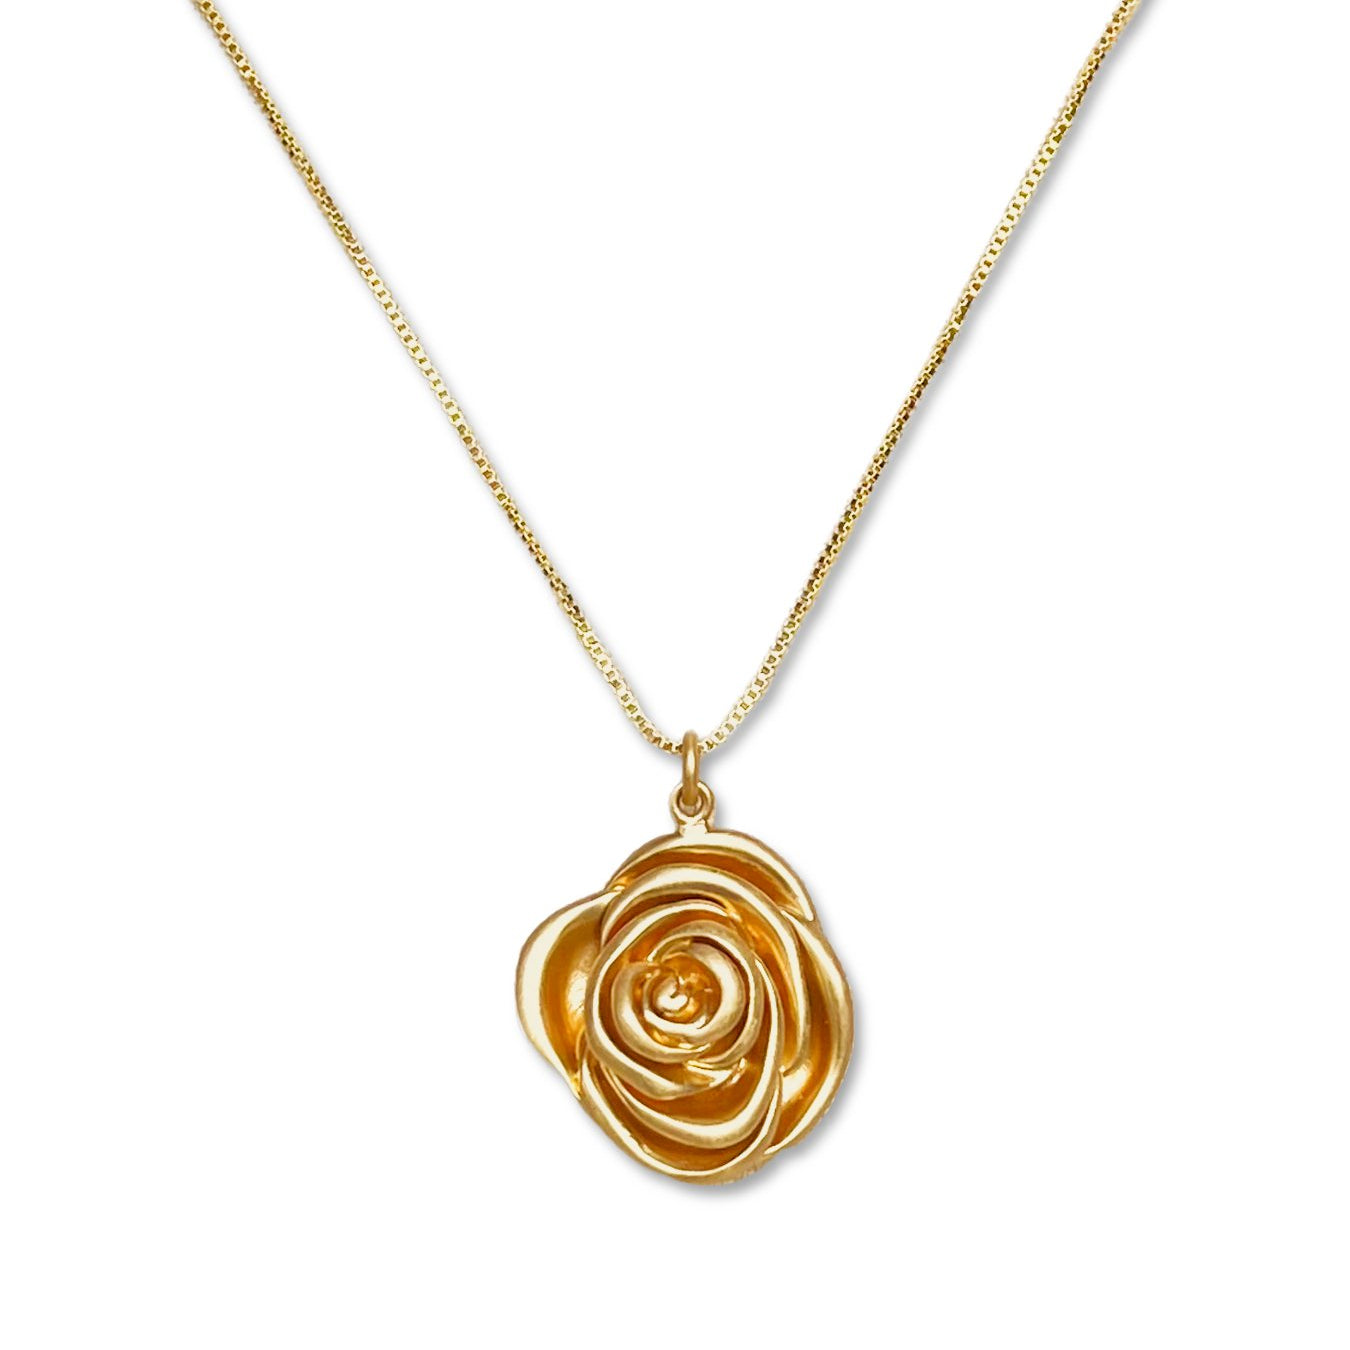 Rose Bloom Necklace - Lesley Evers - Accessories - accessory - Shop